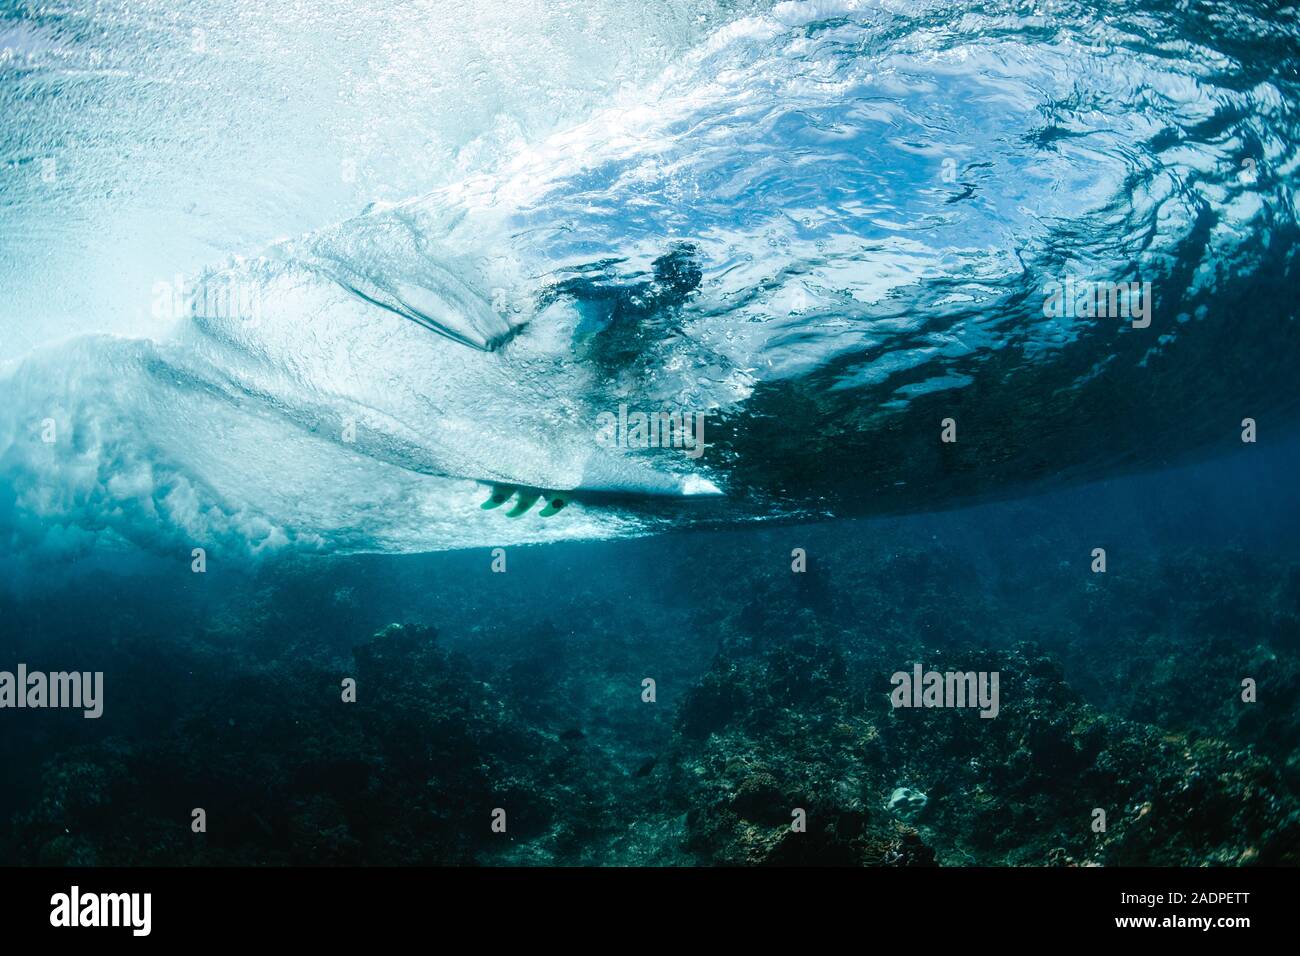 Underwater view of a surfer on the wave Stock Photo